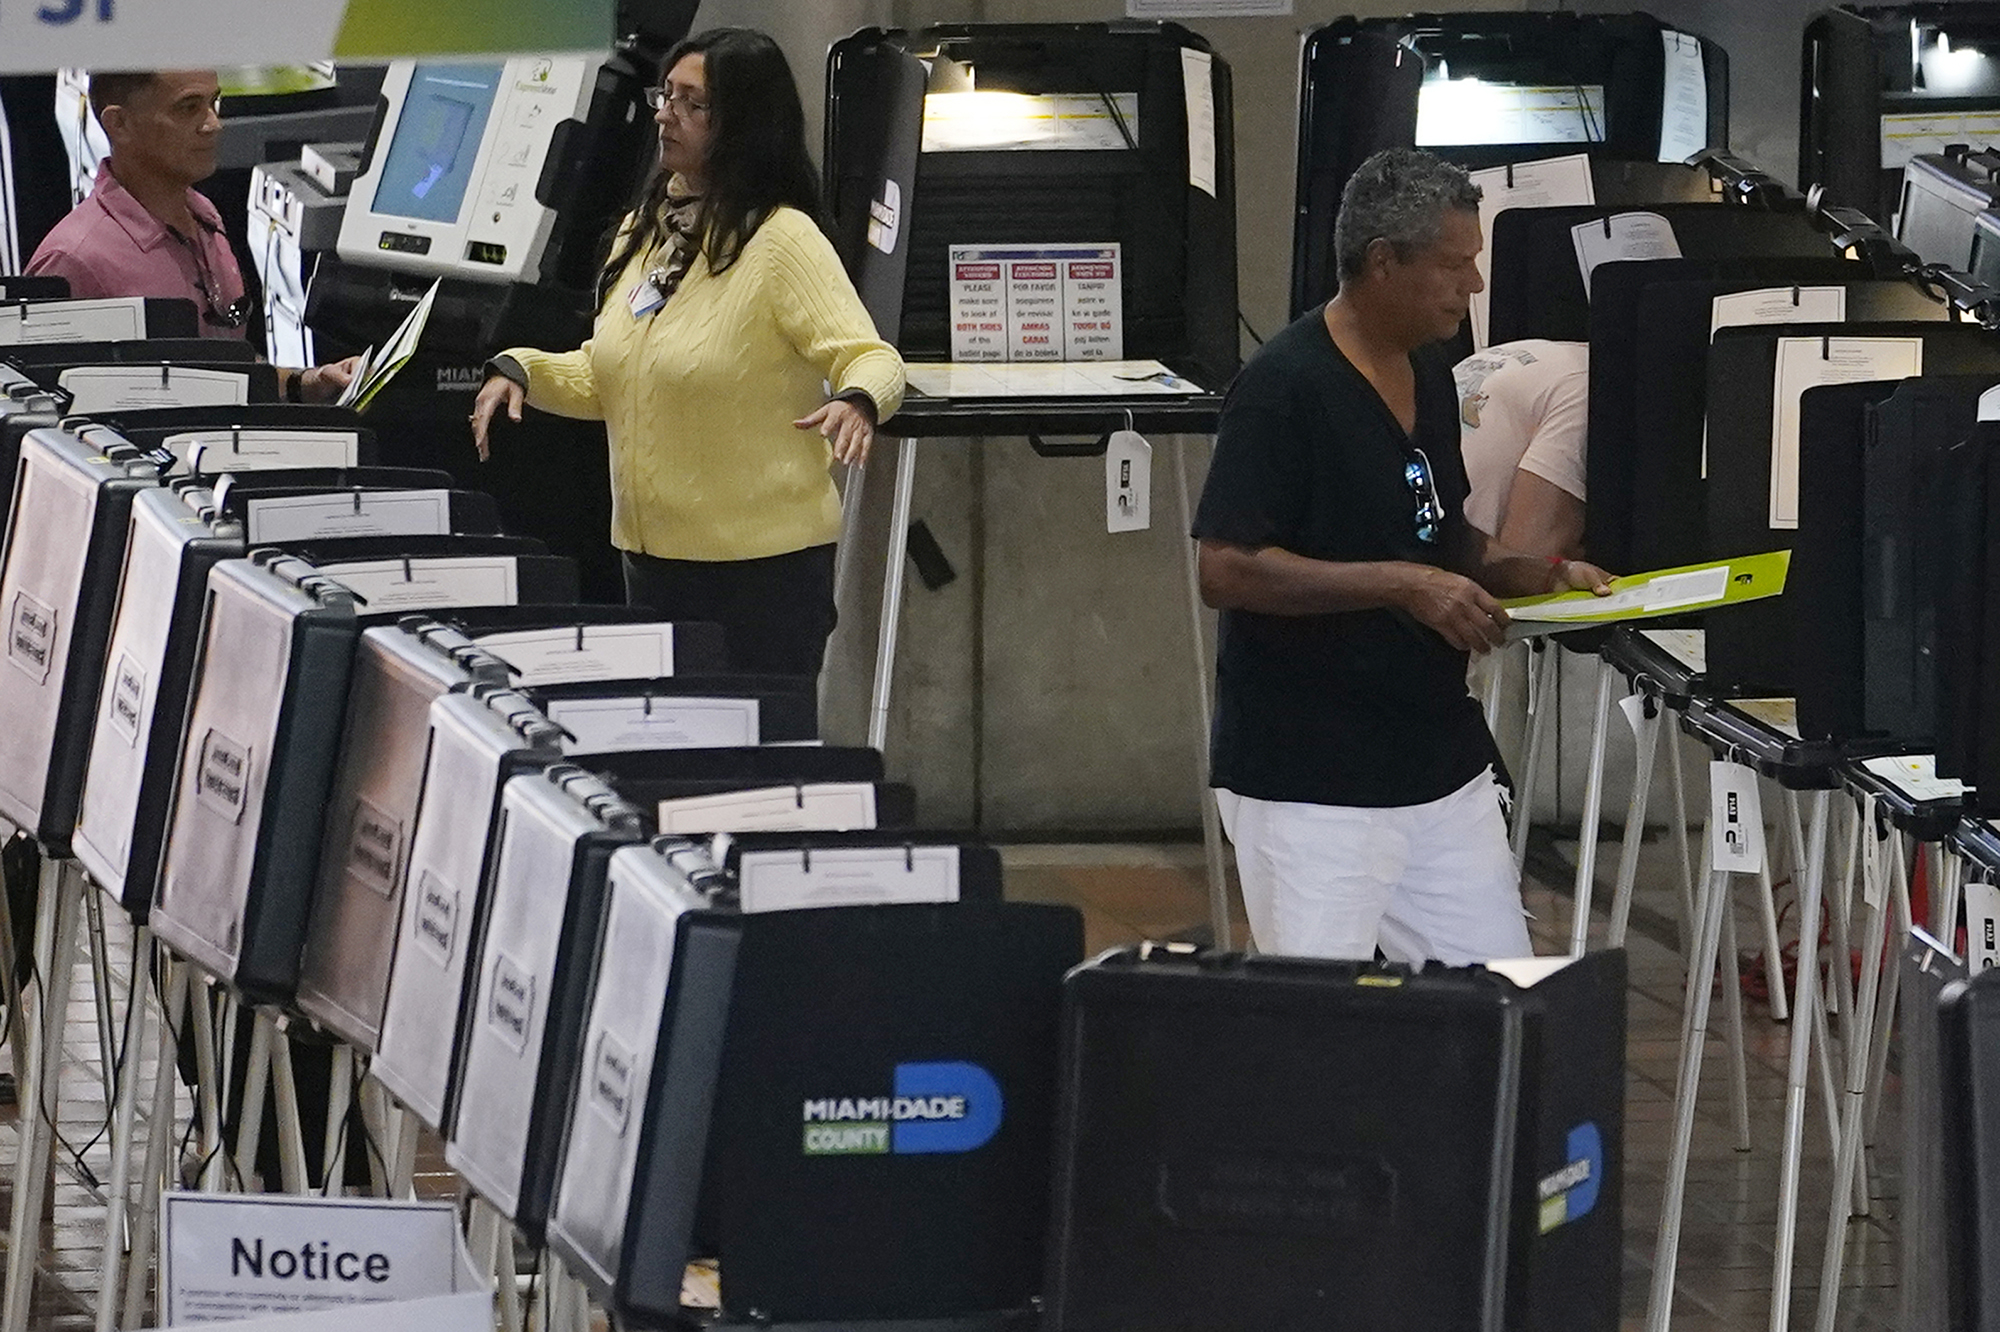 A poll worker directs voters at an early voting site in Miami on Monday, October 31, 2022.